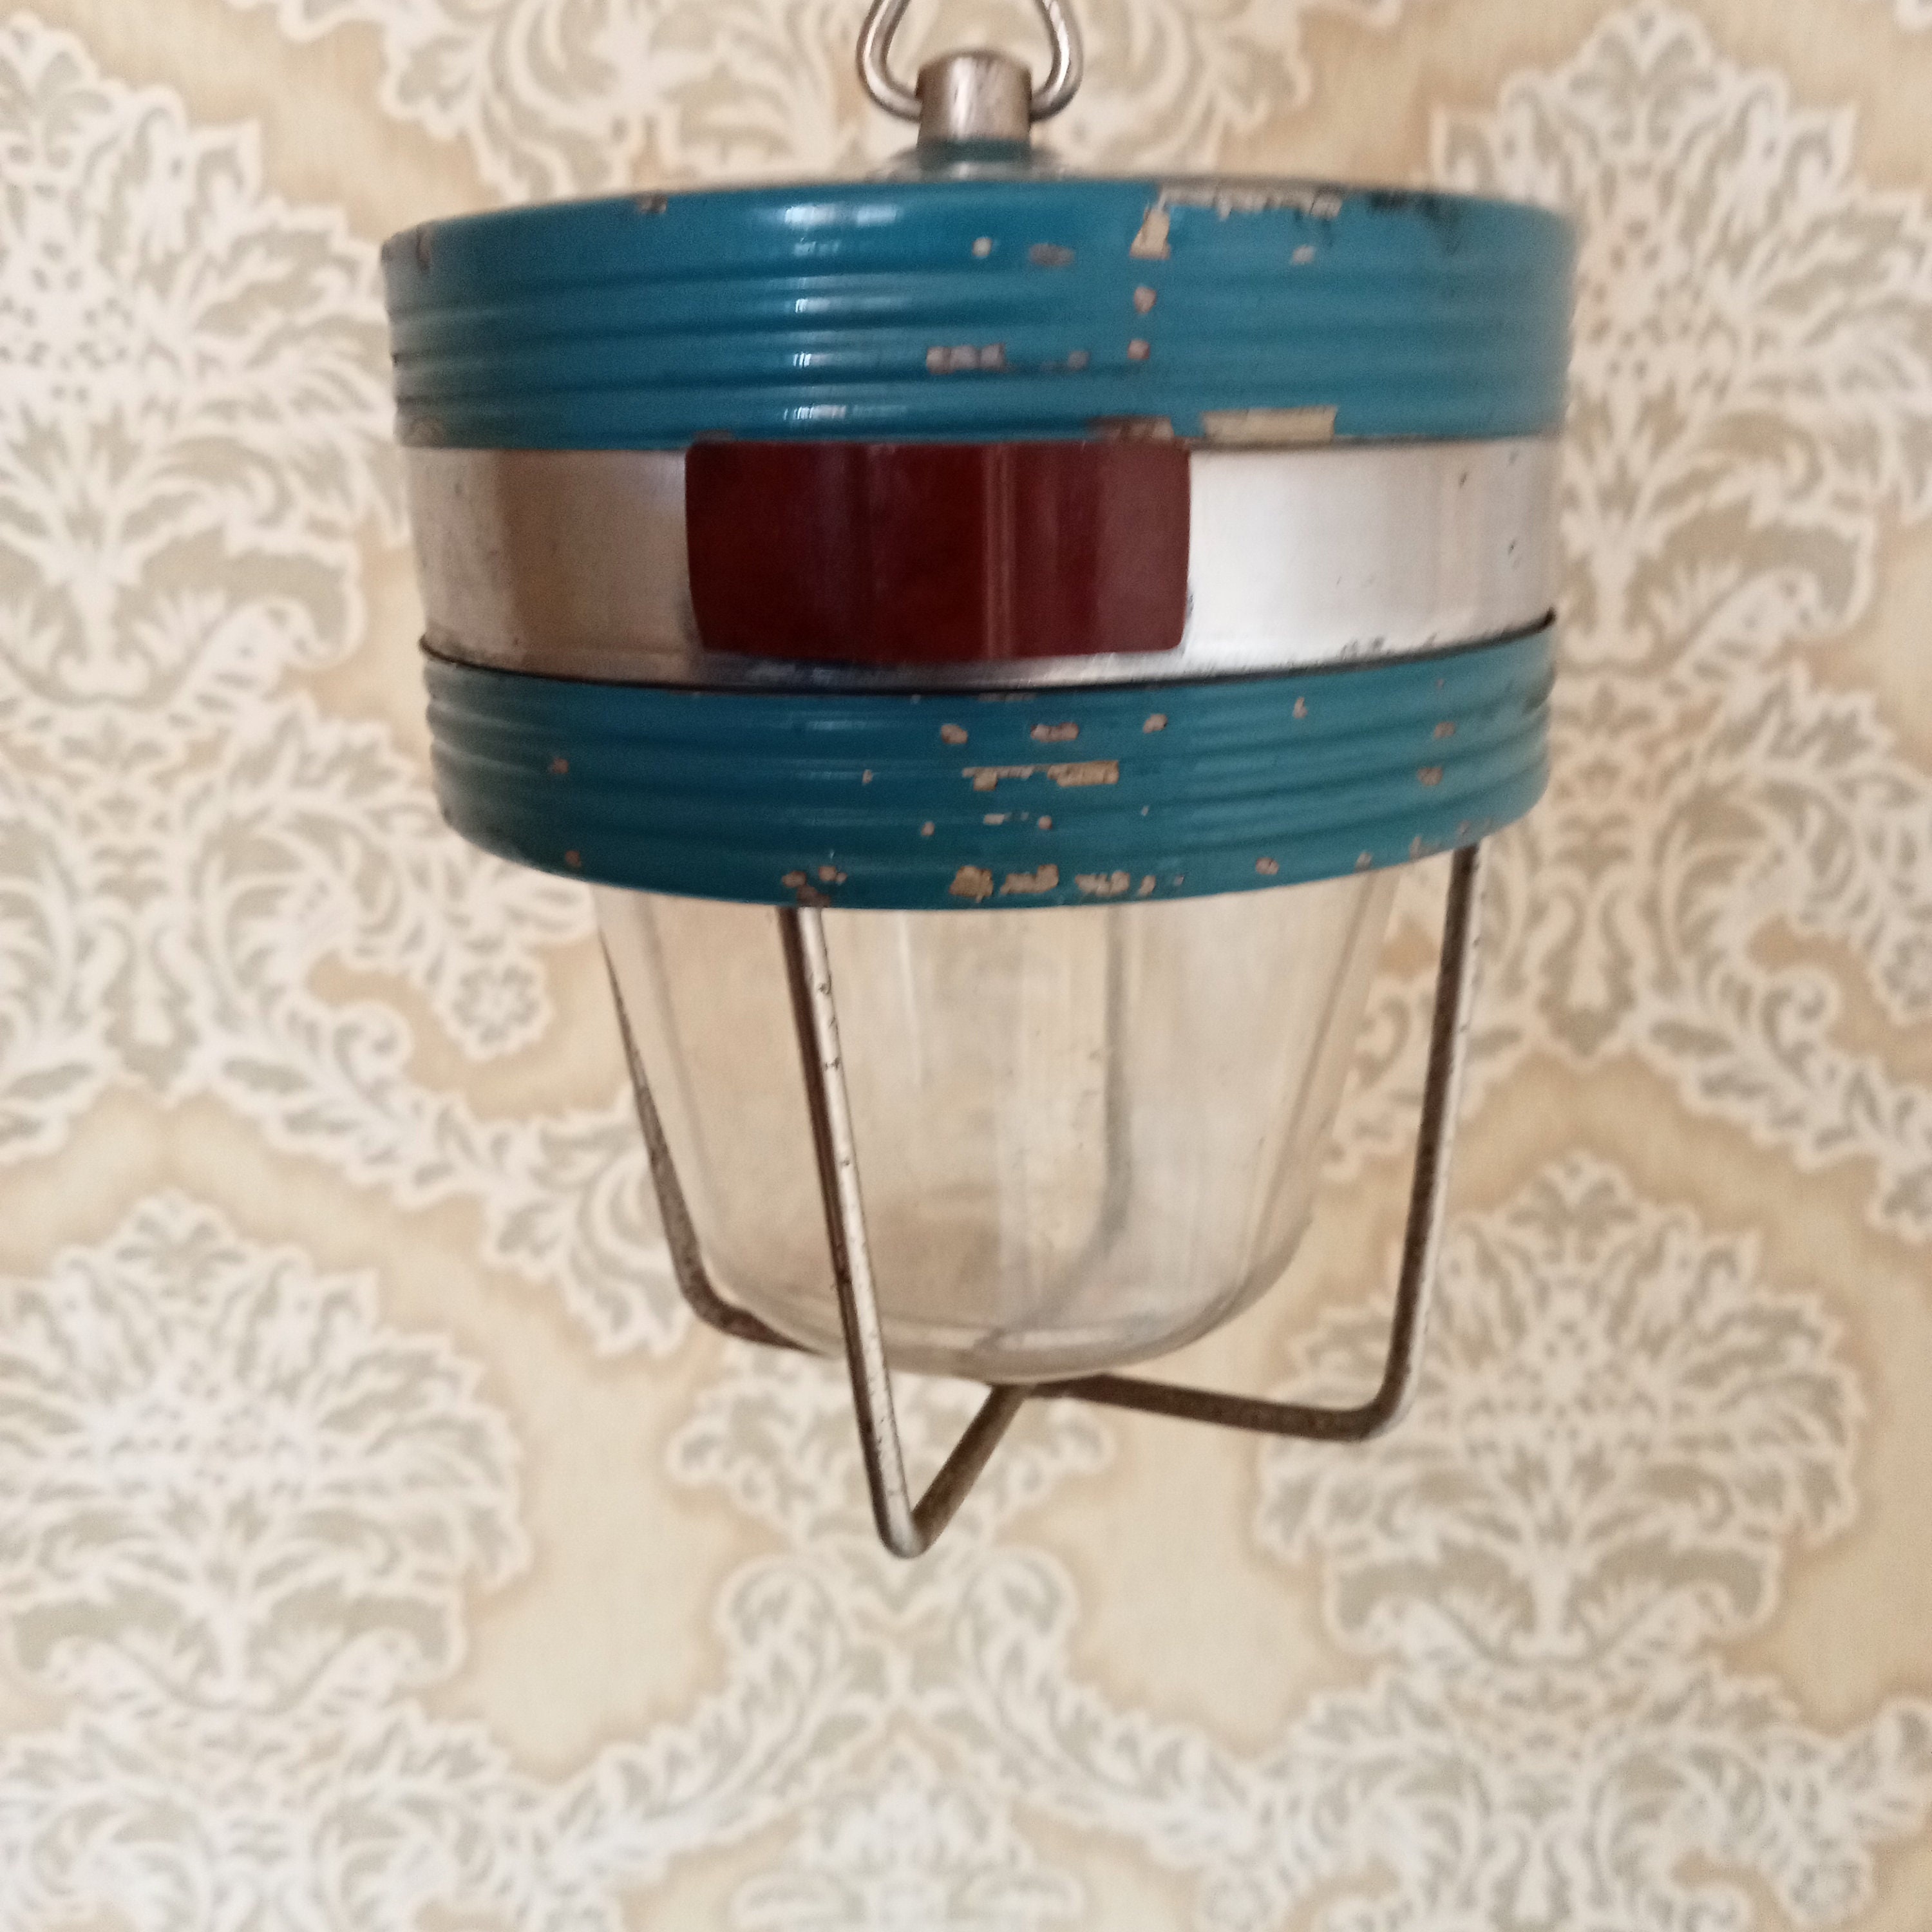 Camp lighting, classic camping style – the folding candle lantern